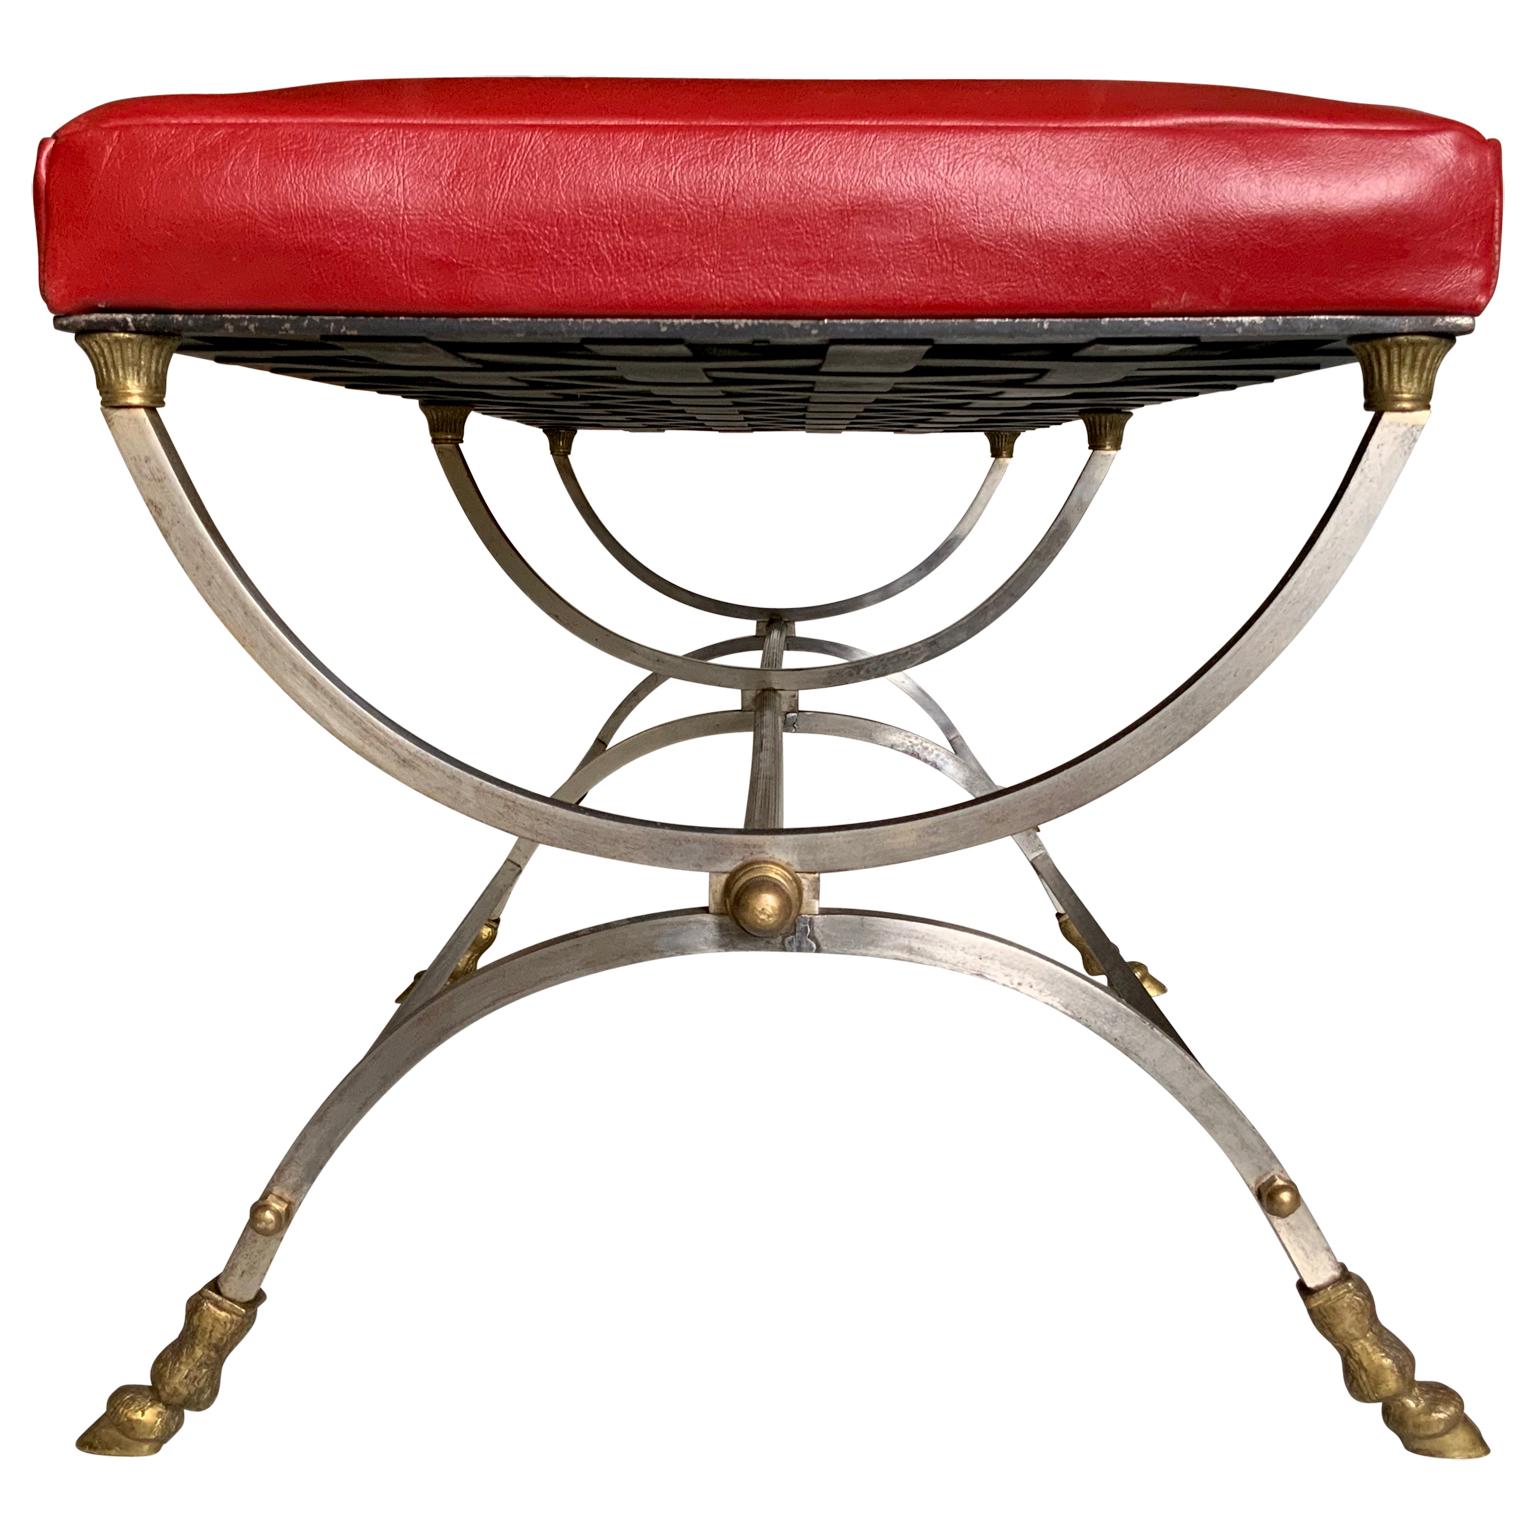 Brass Maison Jansen Neoclassical Bronze and Steel Bench in Red Leather Upholstery